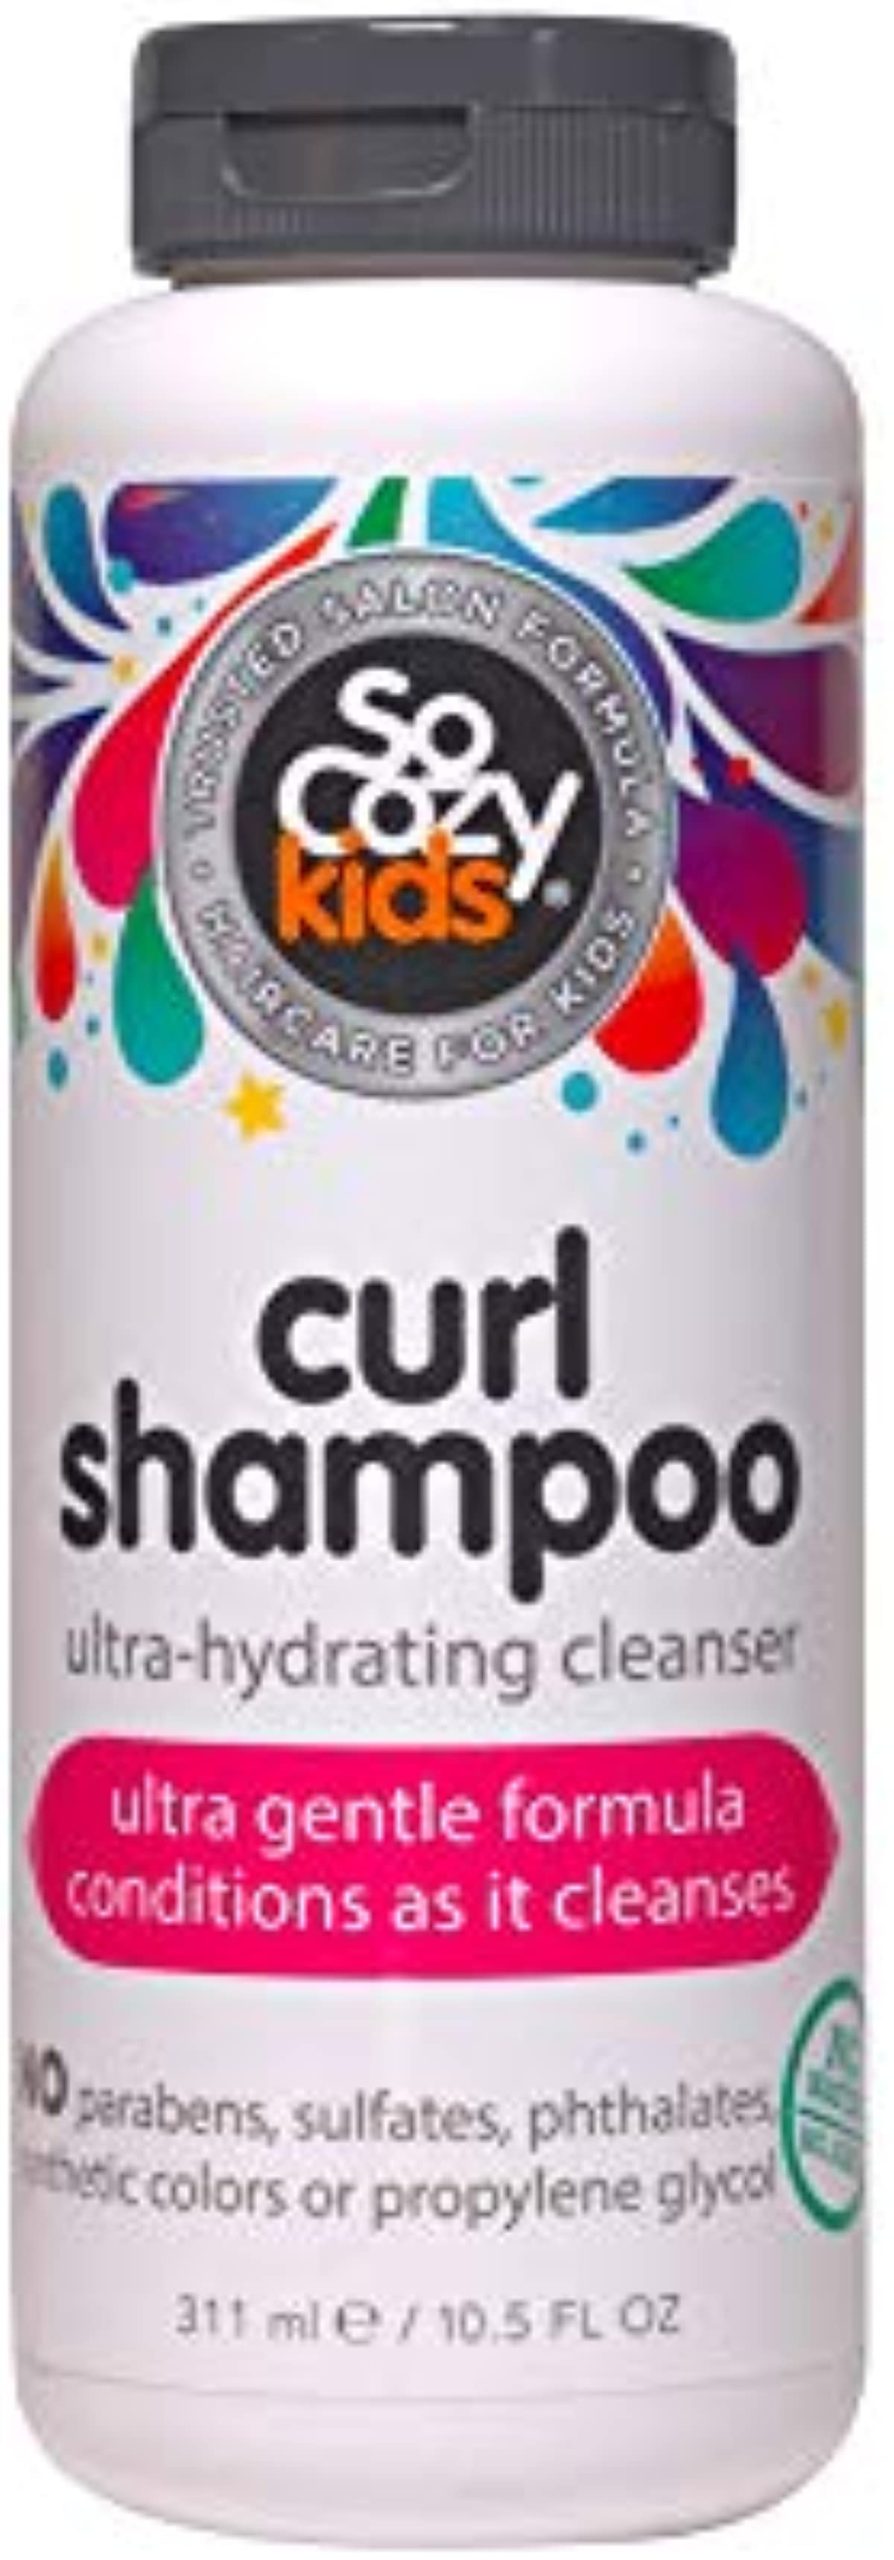 SoCozy Curl Shampoo | For Kids Hair | Ultra-Hydrating Cleanser | No Parabens, Sulfates, Synthetic Colors or Dyes, Sweet-Crème, 10.5 Fl Oz